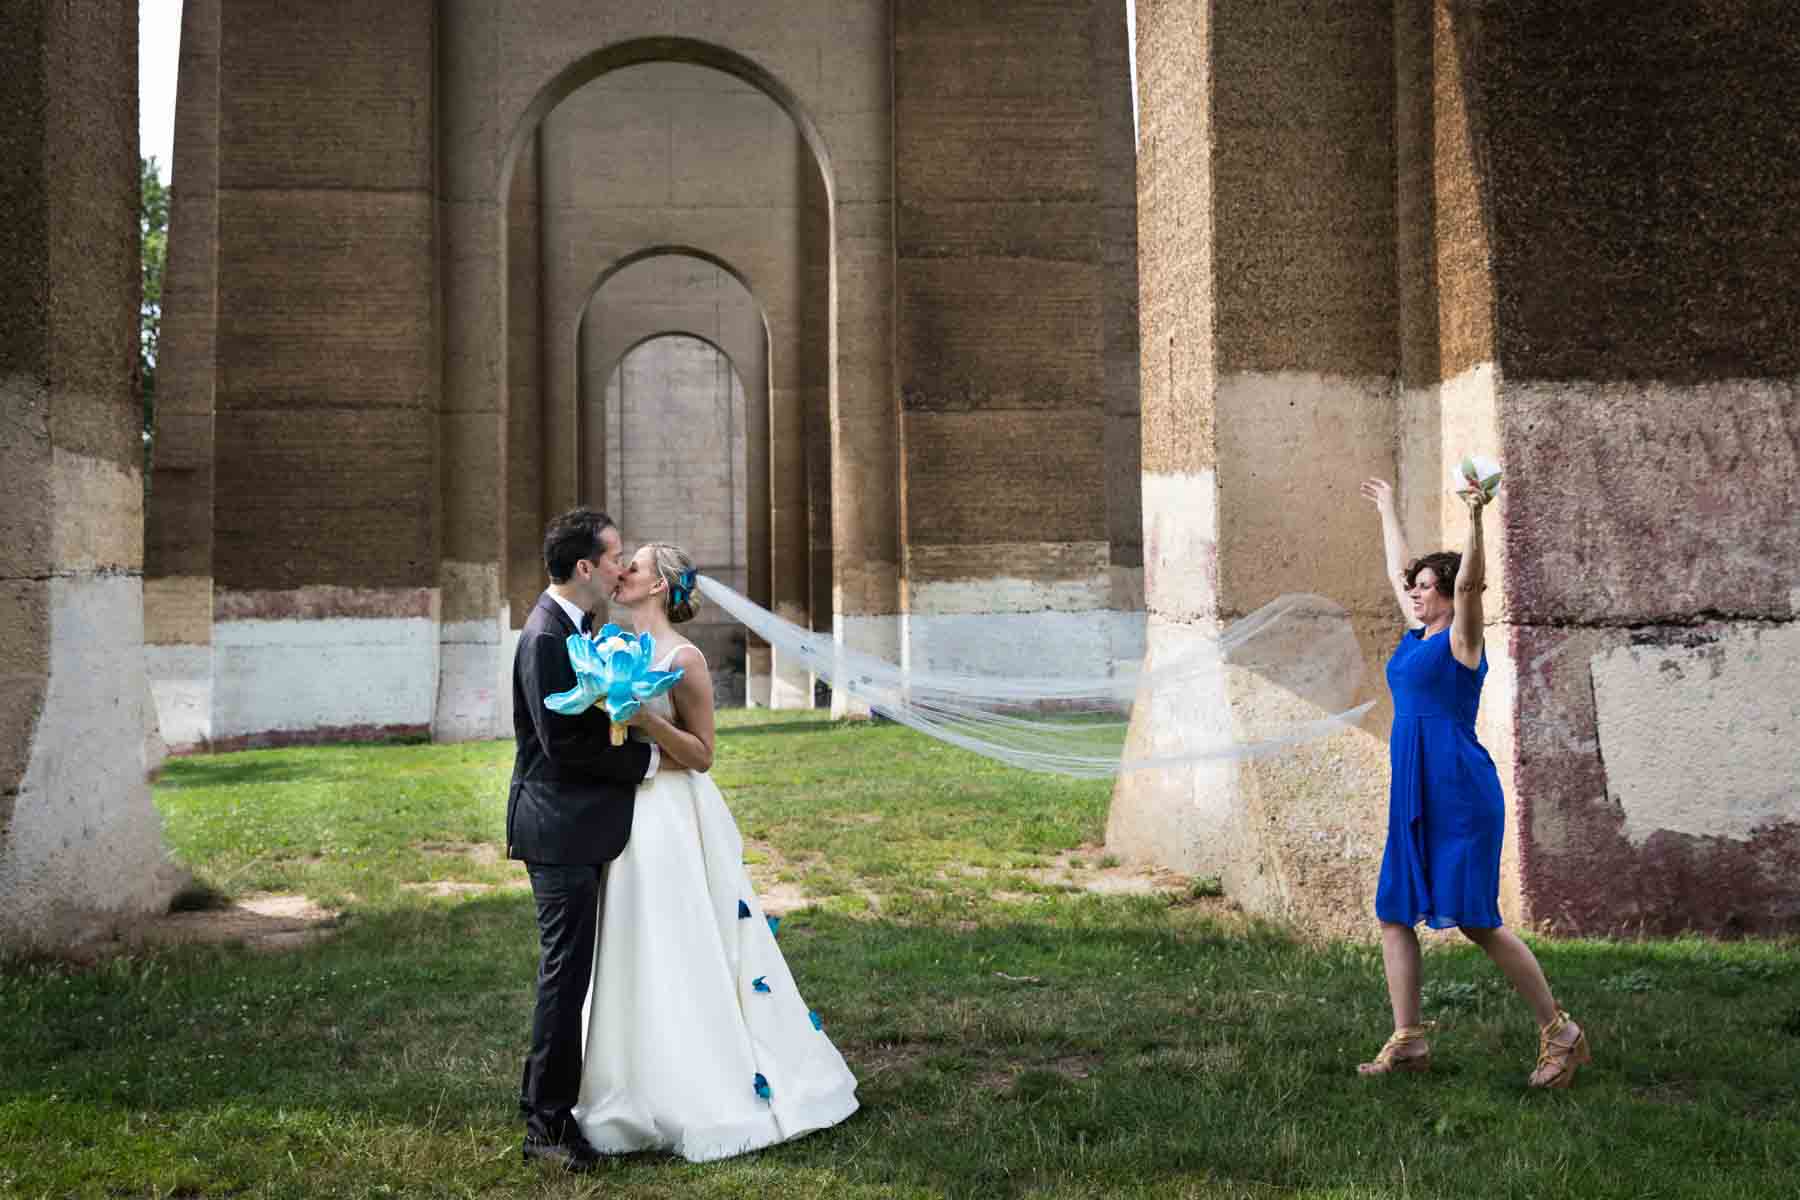 Bride and groom kissing under Hell Gate Bridge while bridesmaid in blue dress throws veil in air